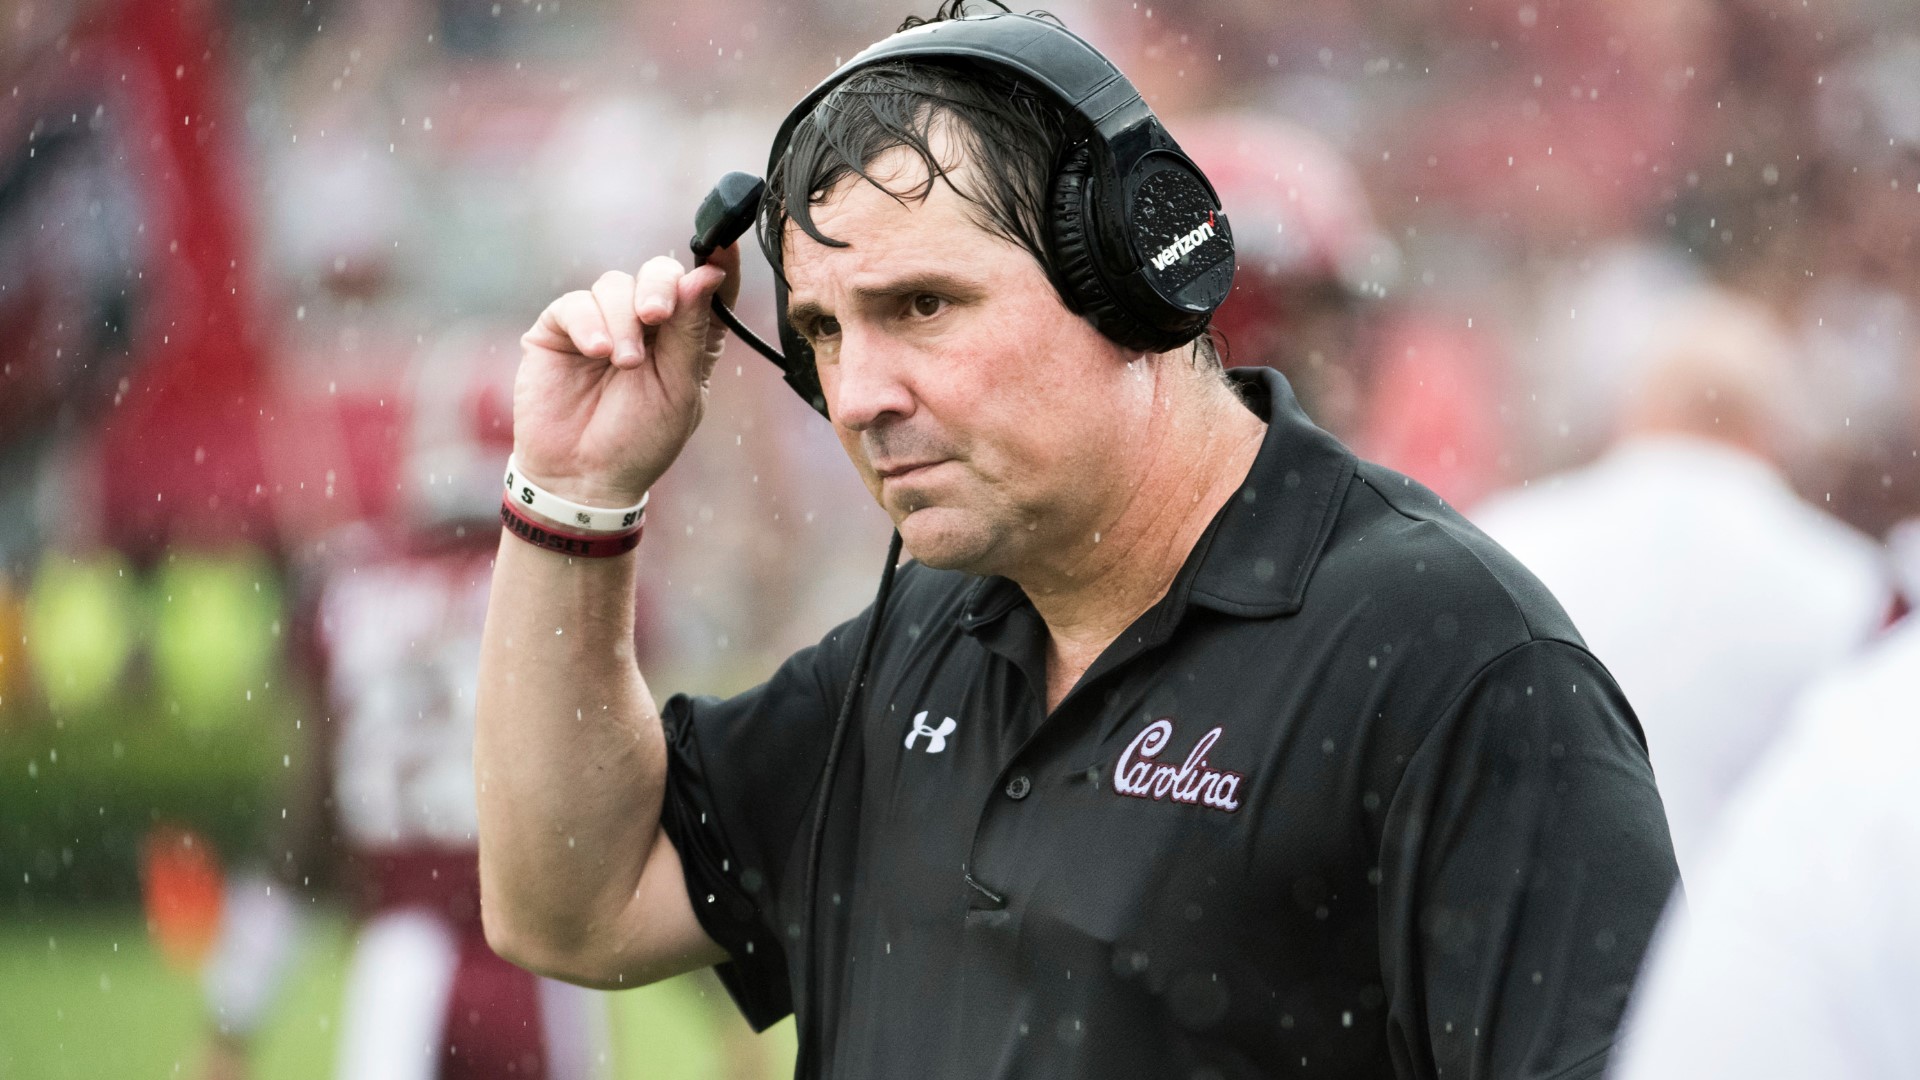 In just a few days, UNC and USC will square off at Bank of America Stadium in Charlotte. WCNC Sports Director Nick Carboni sits down with Gamecocks coach Will Muschamp ahead of the game.